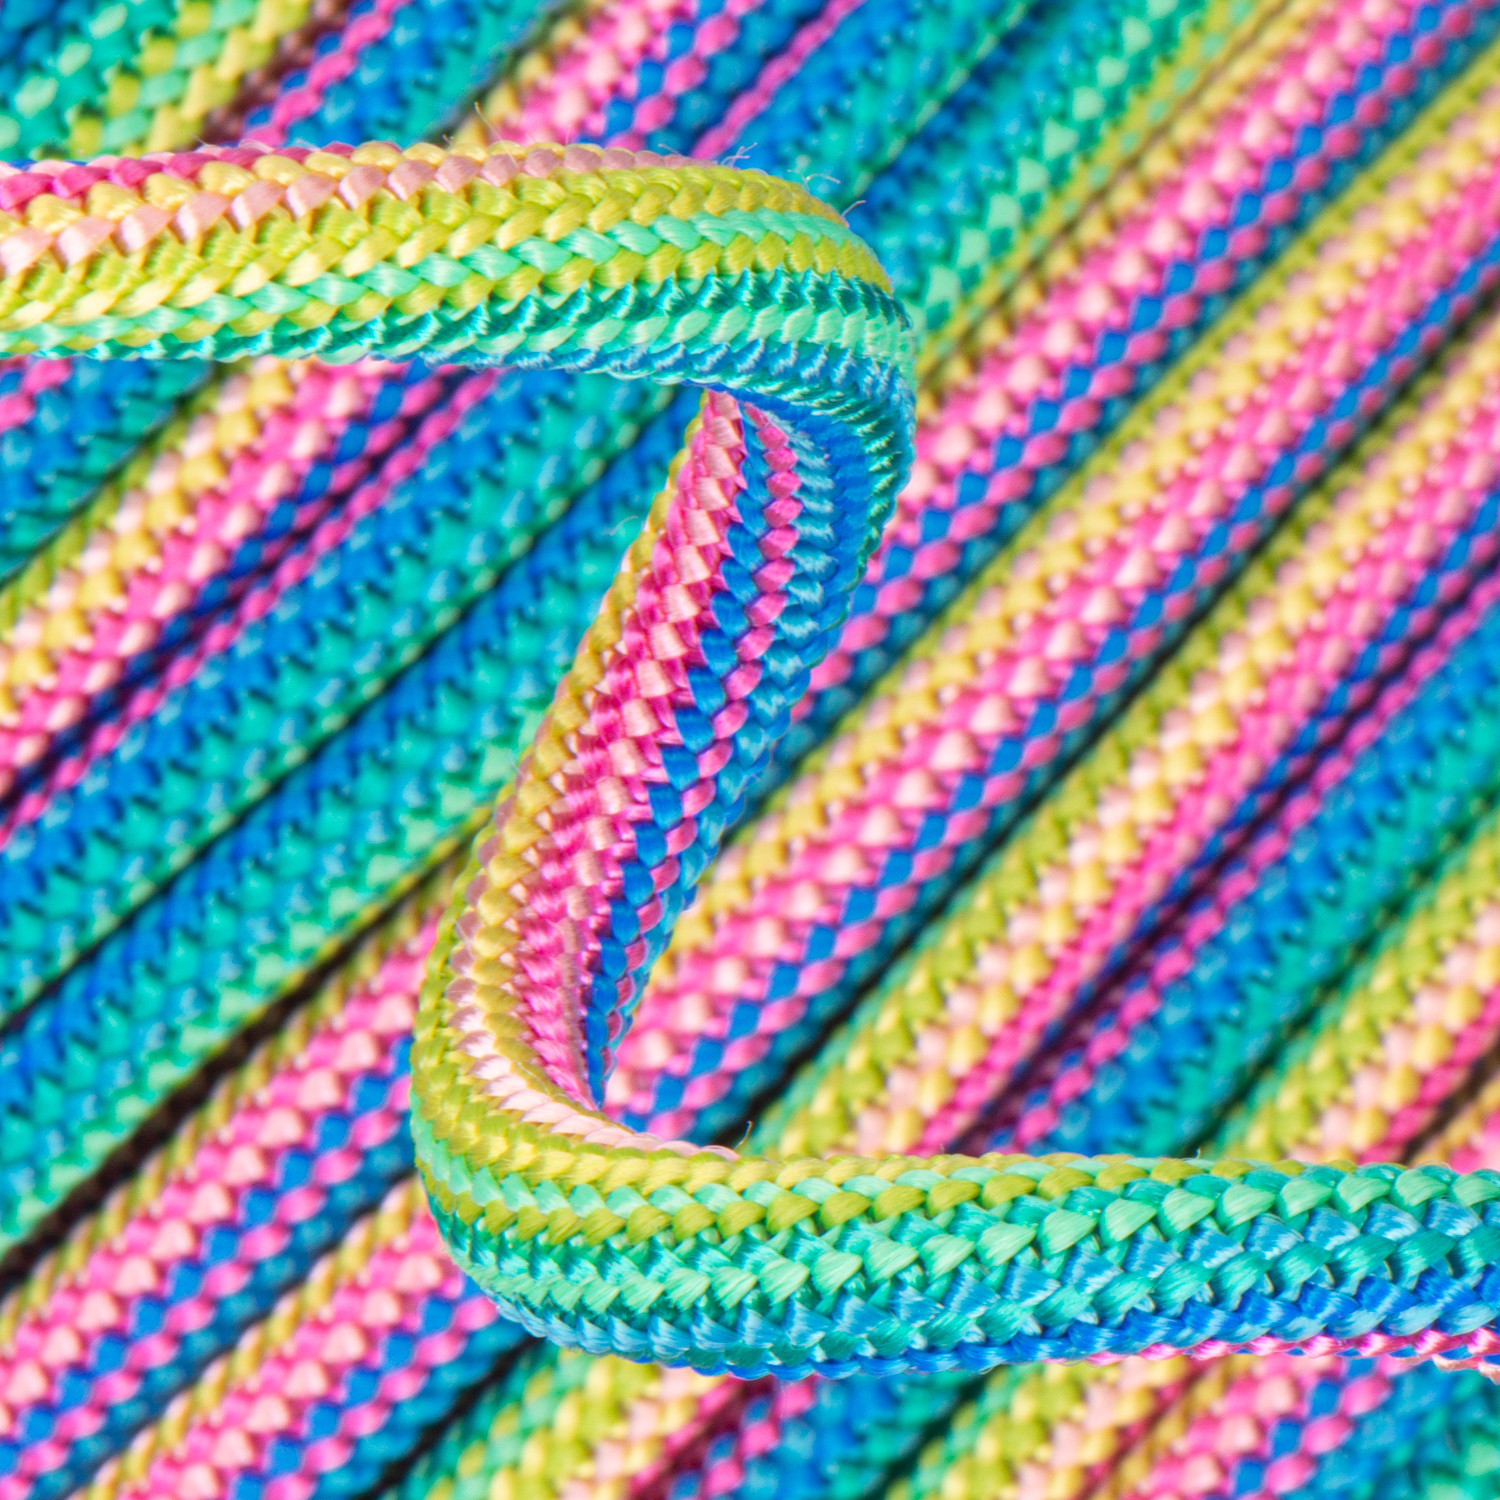 Knitted Cord - Multi Colours